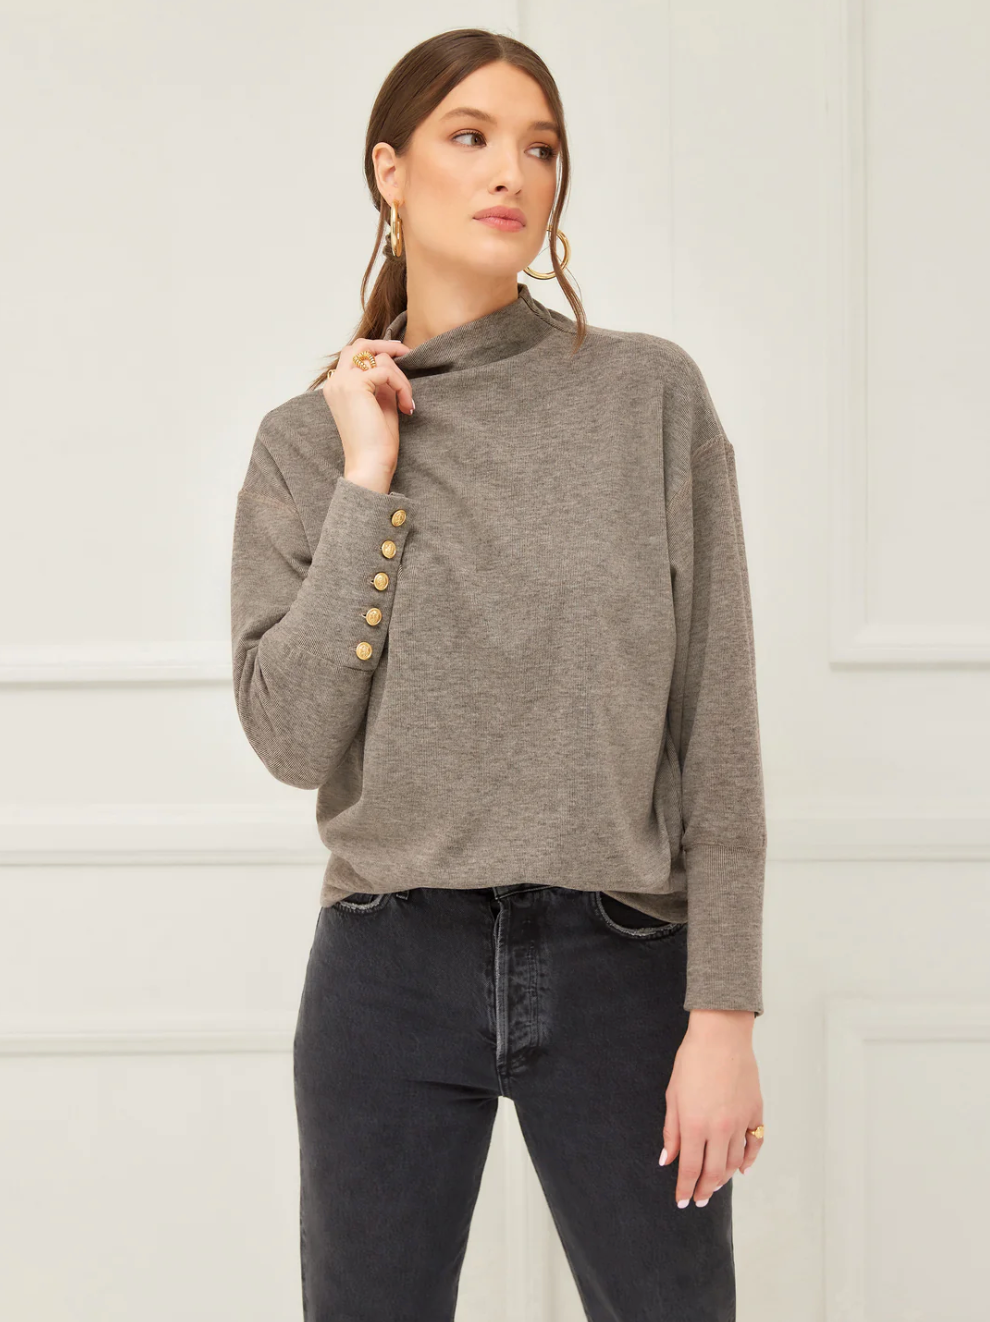 Mock neck top - taupe